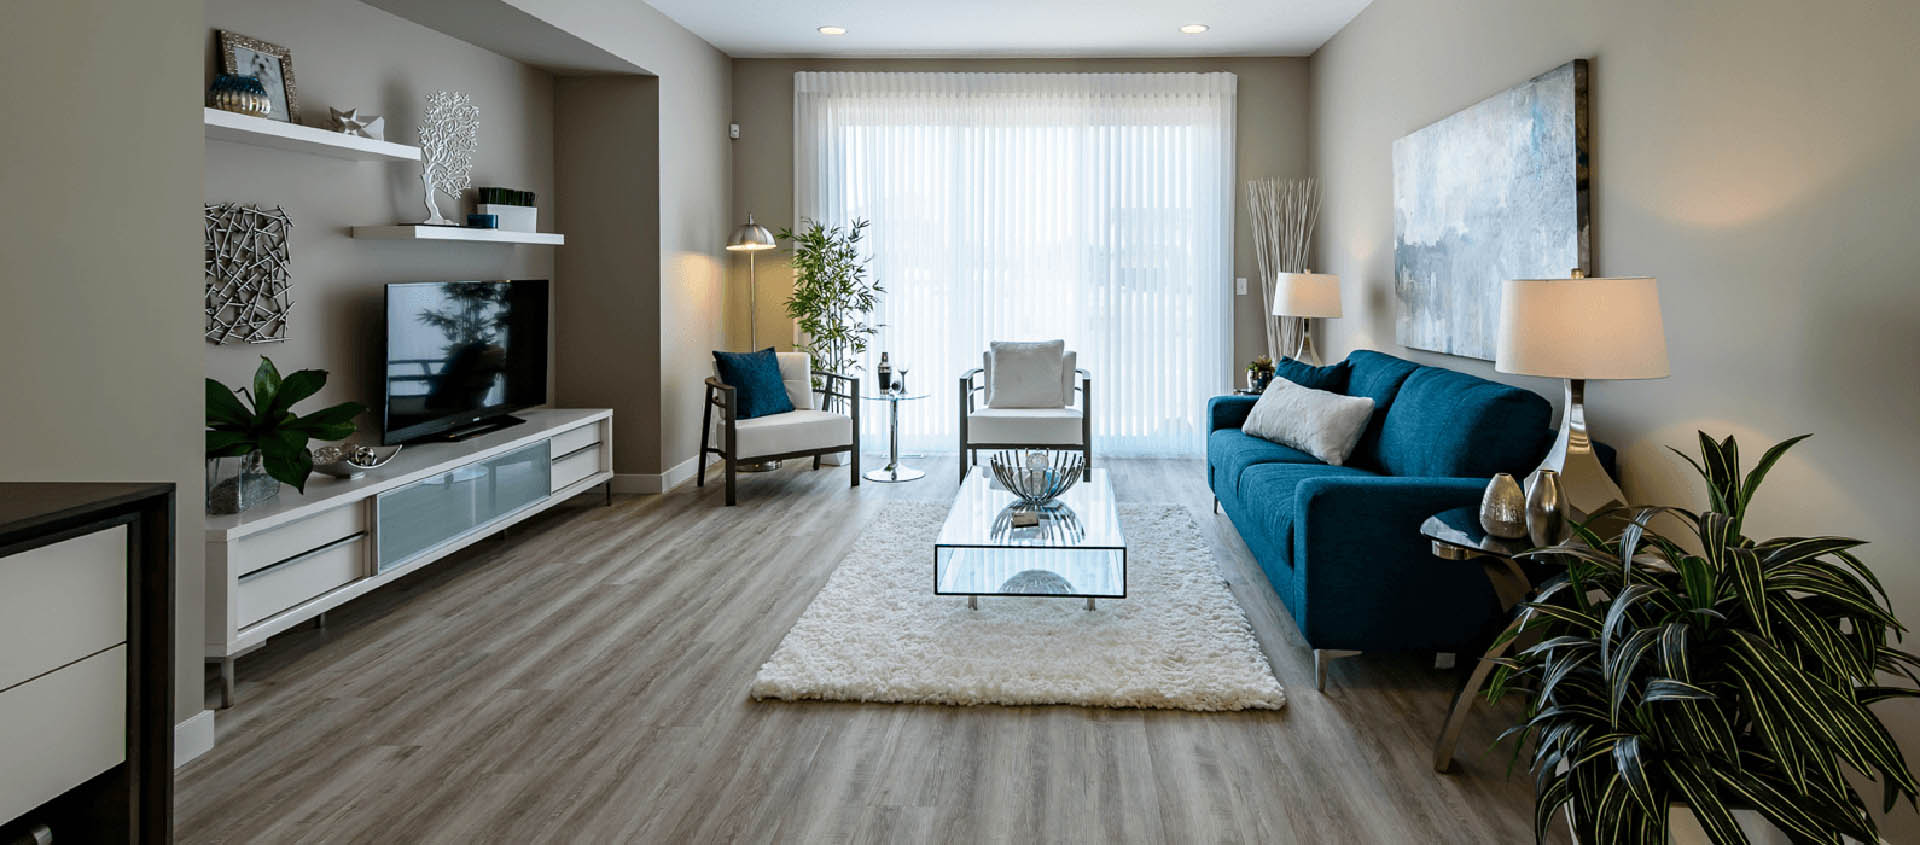 your-flooring-choices-new-home-build-featured-image